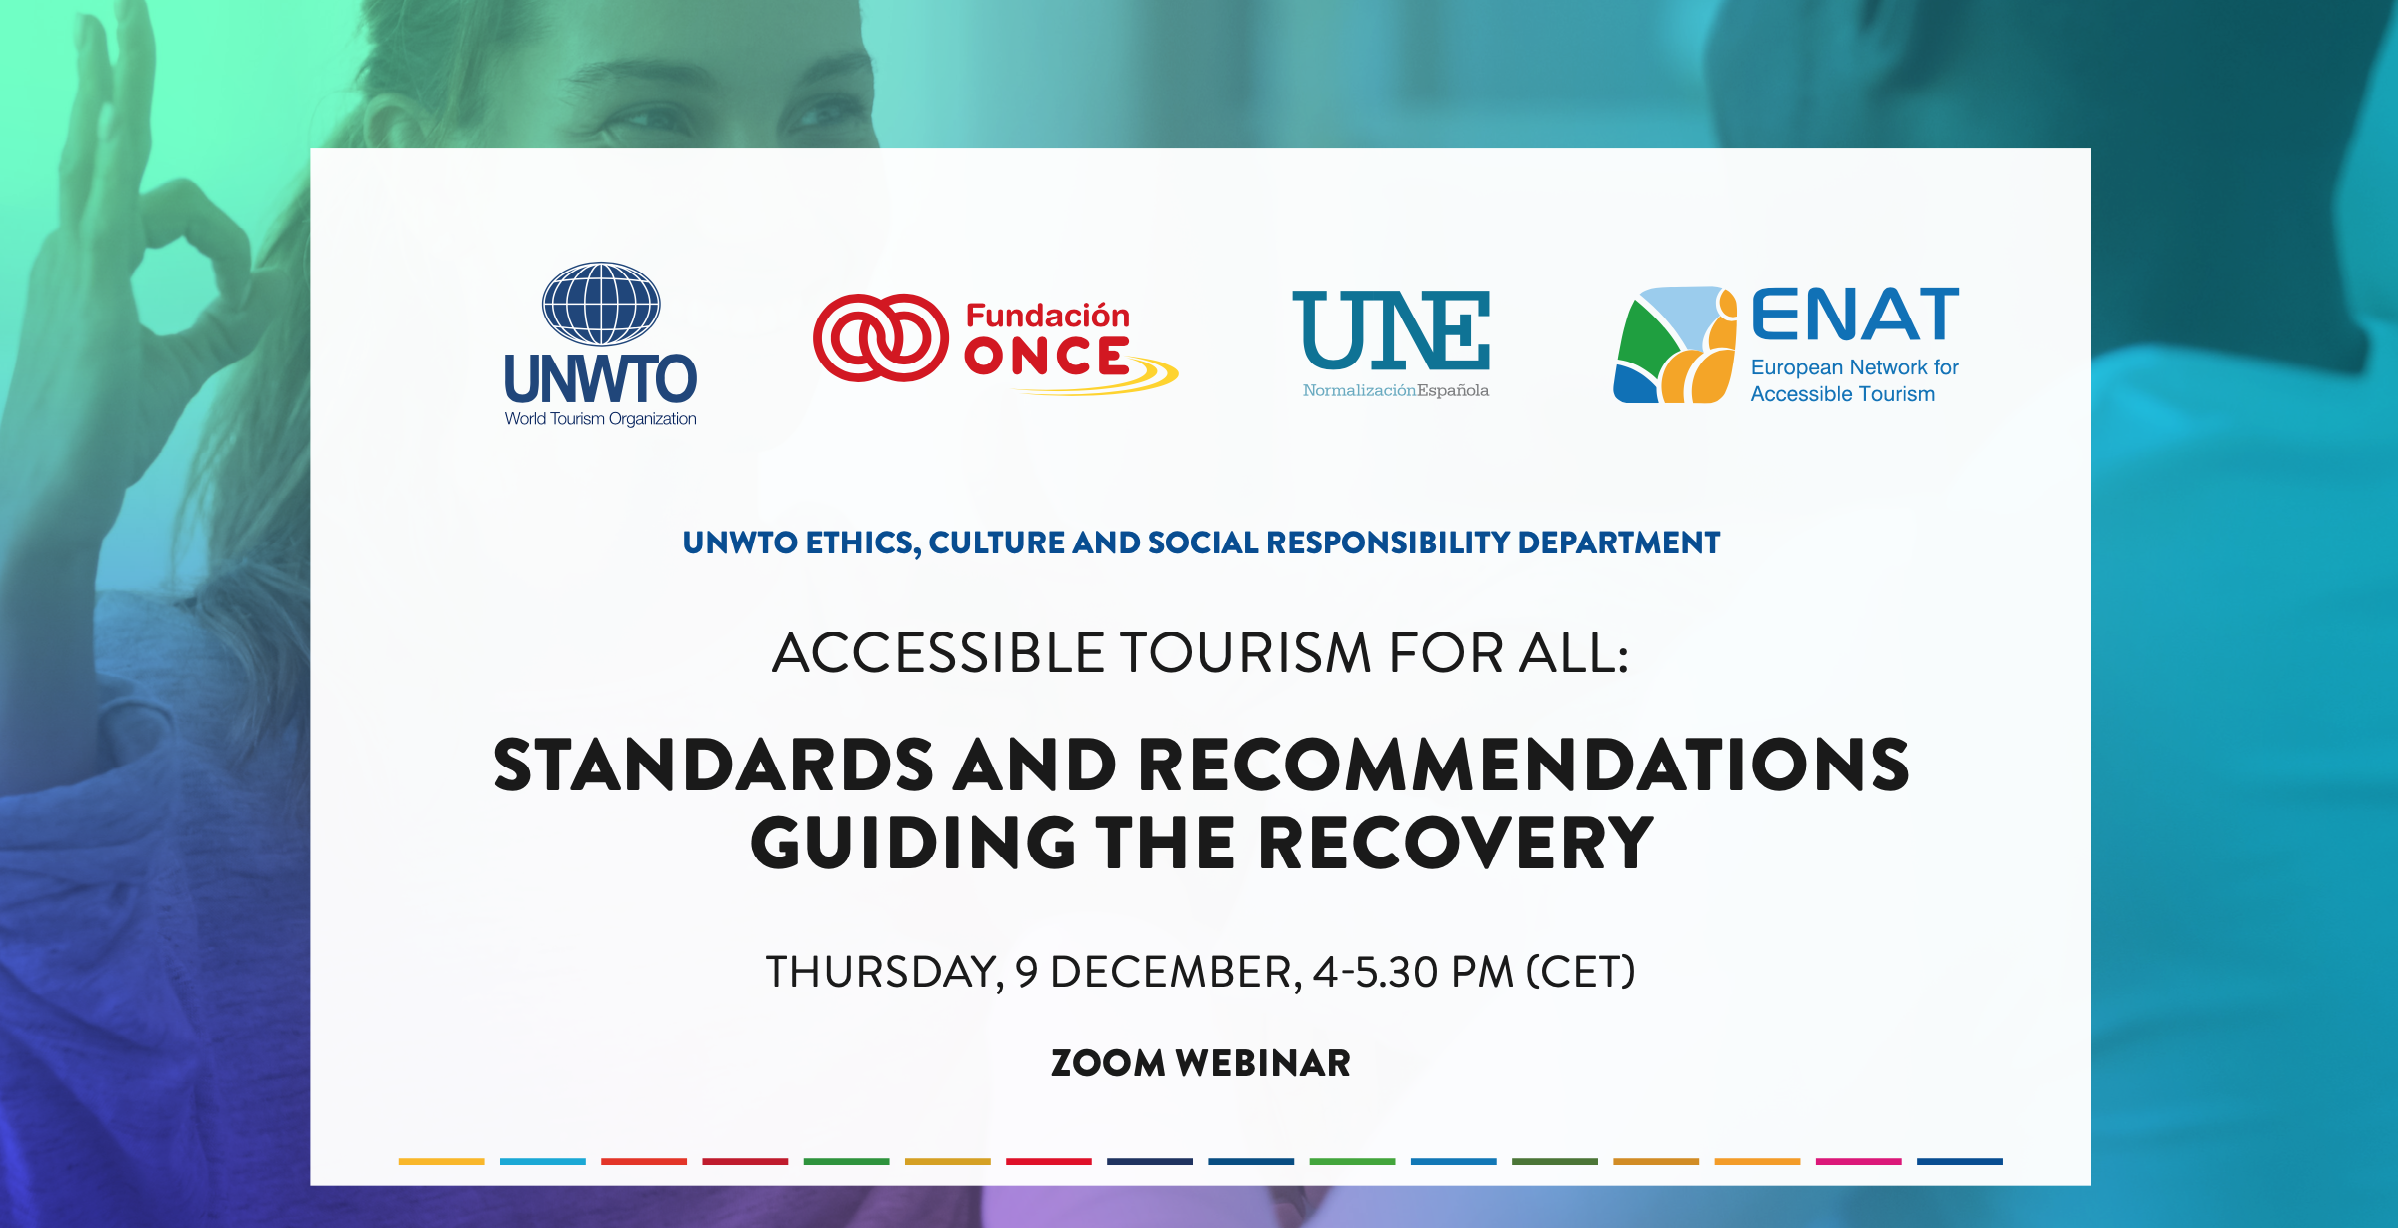 Image save the date UNWTO Webinar 9 December 2021 